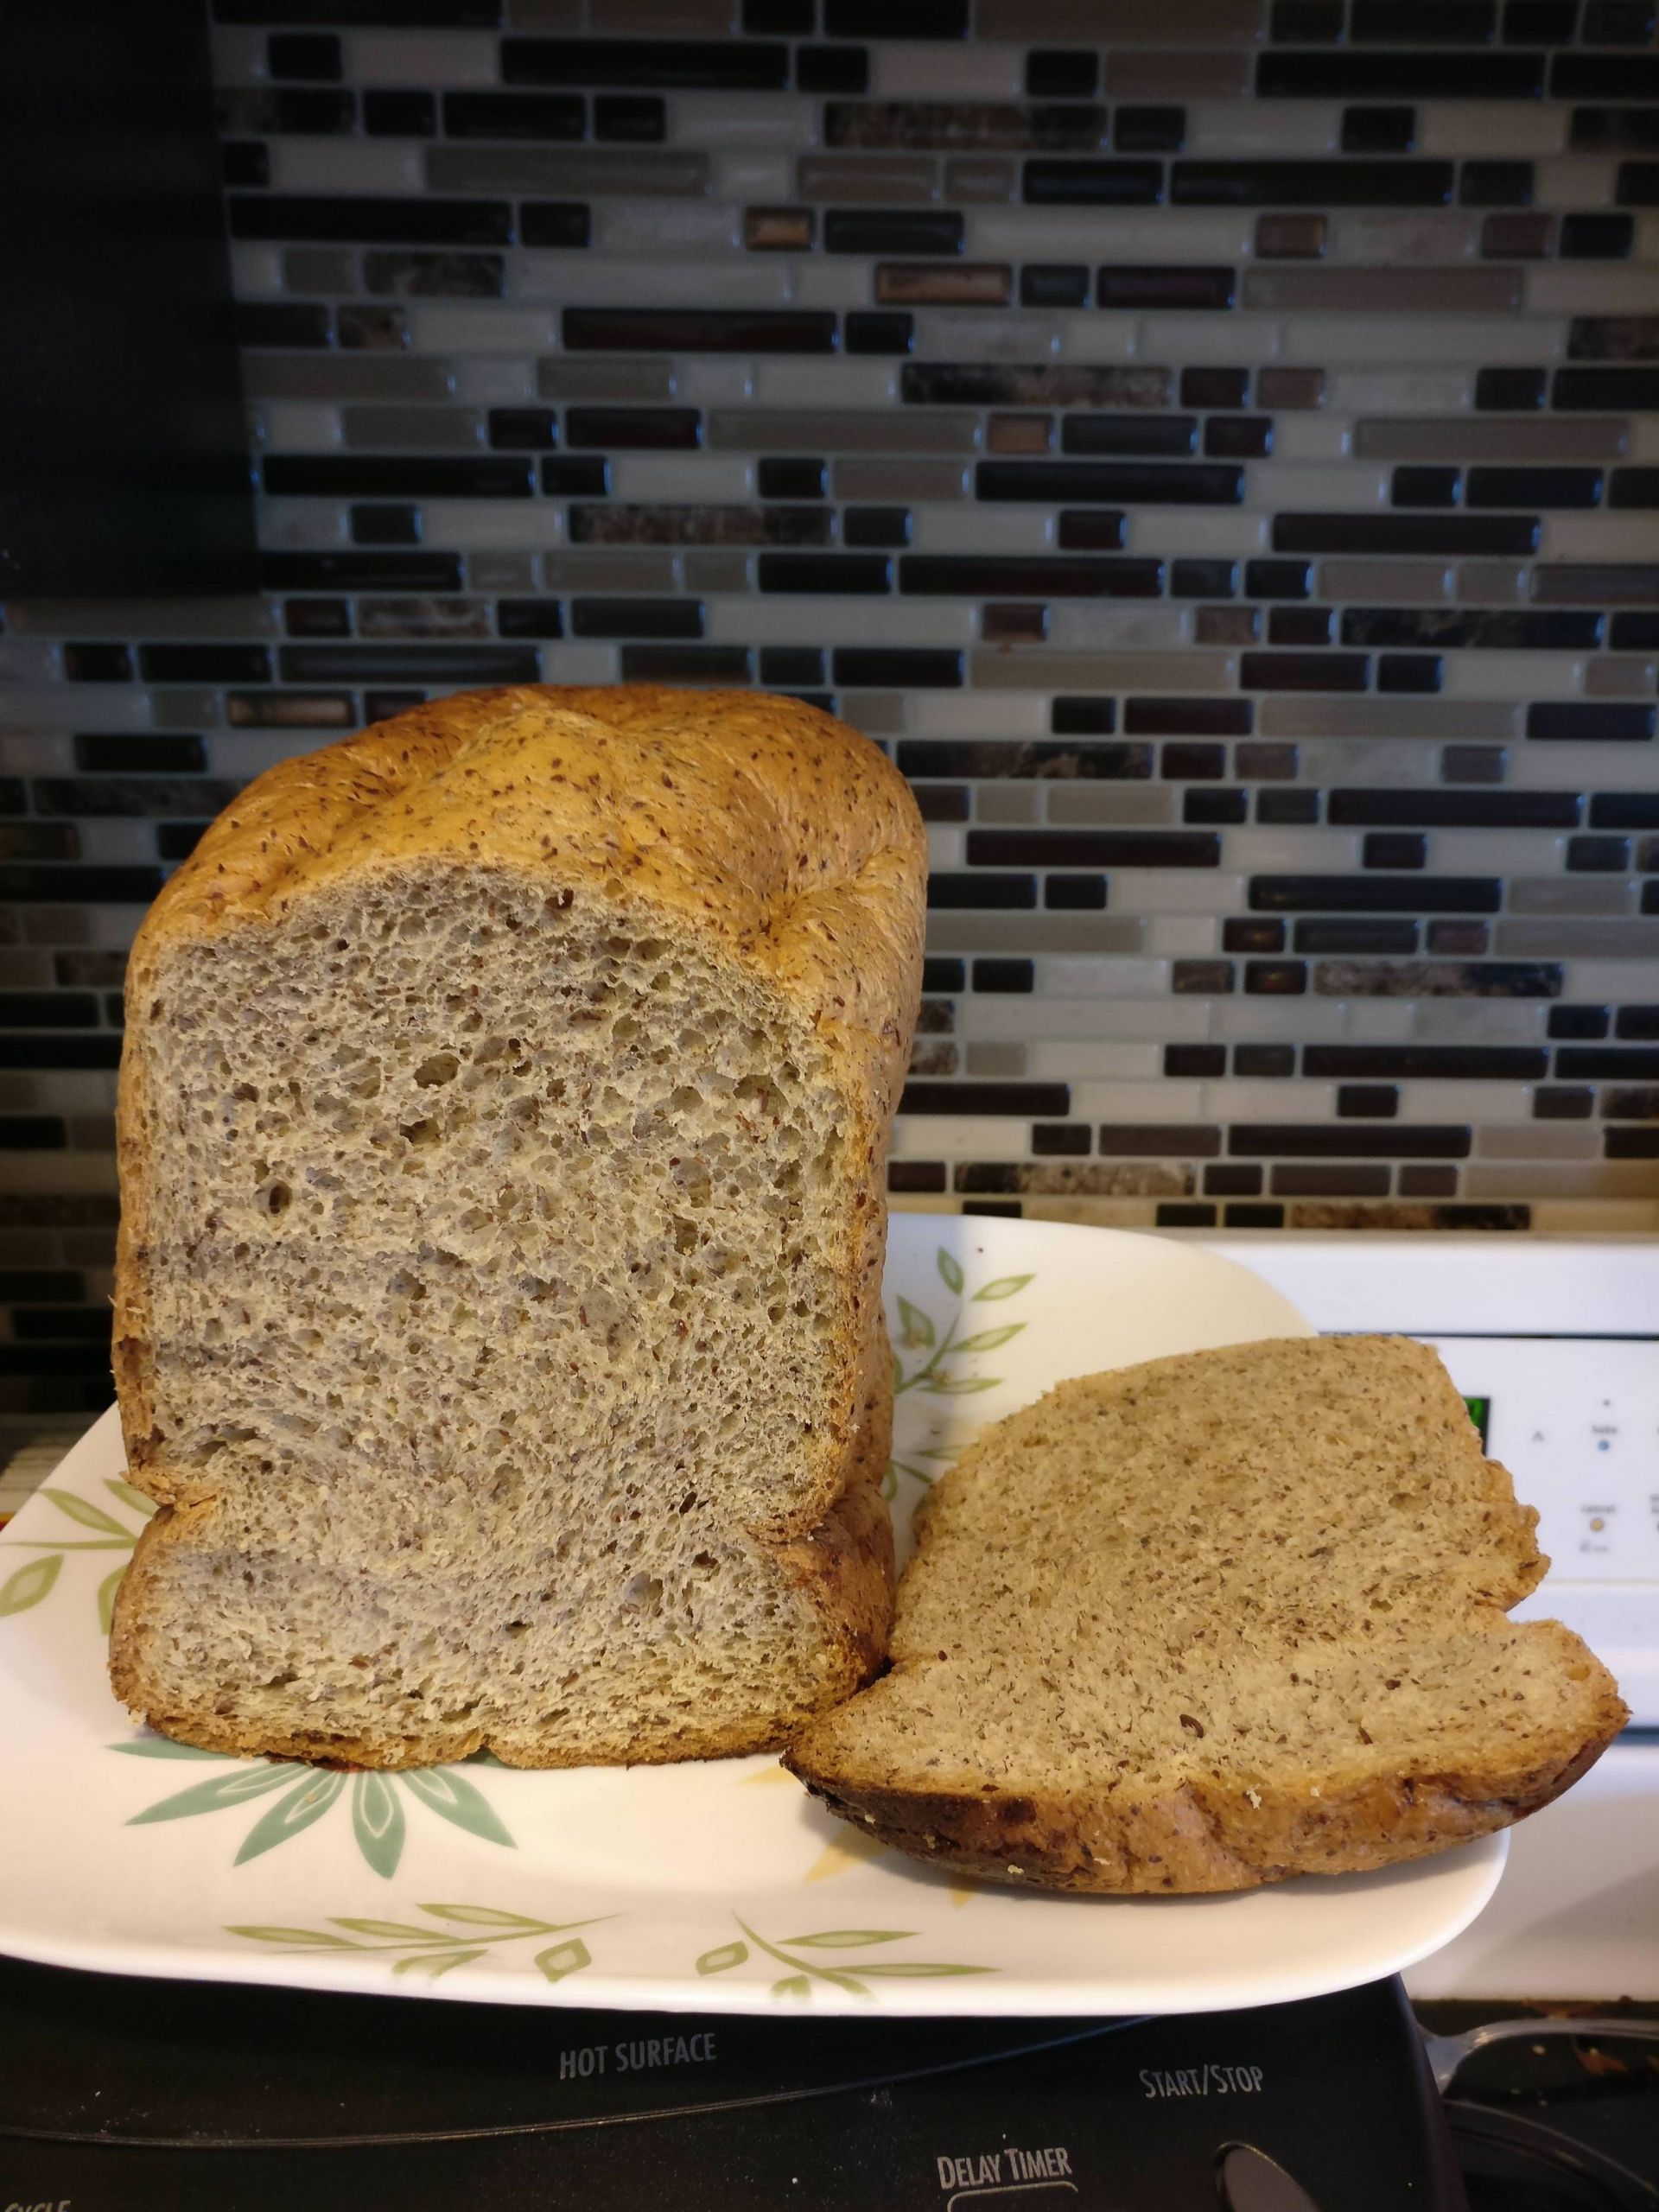 Keto Yeast Bread
 I made keto yeast bread in my bread machine and it is